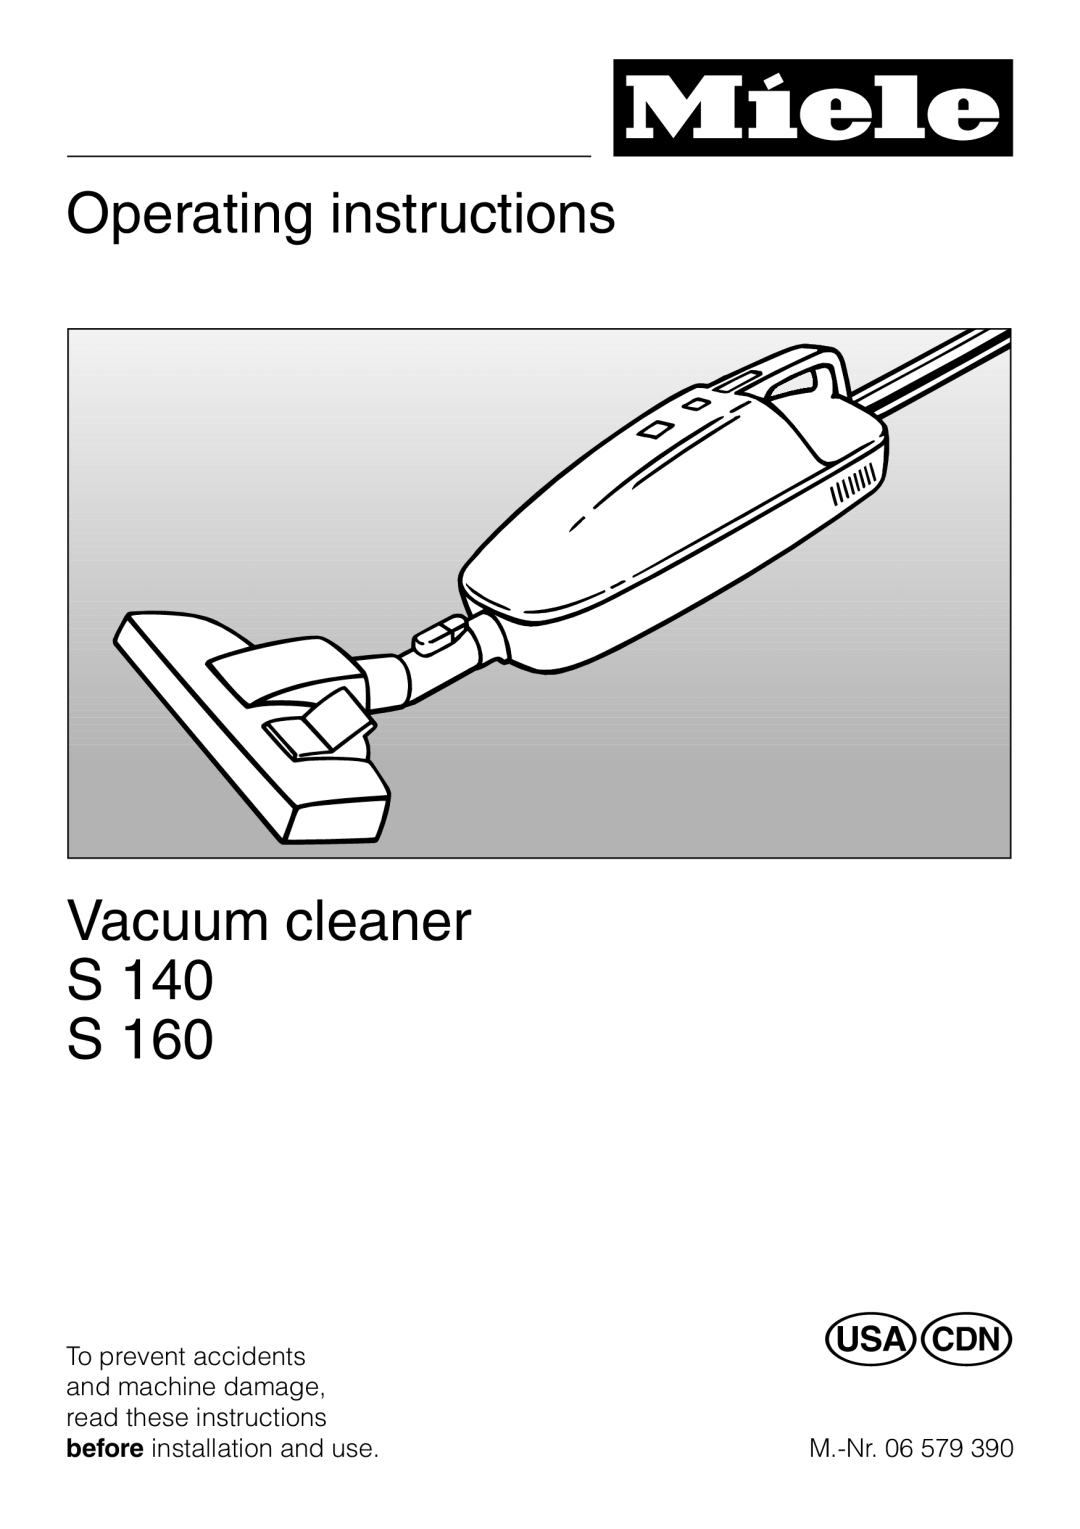 Miele S 140 S 160 manual Operating instructions, Vacuum cleaner S140 S160 